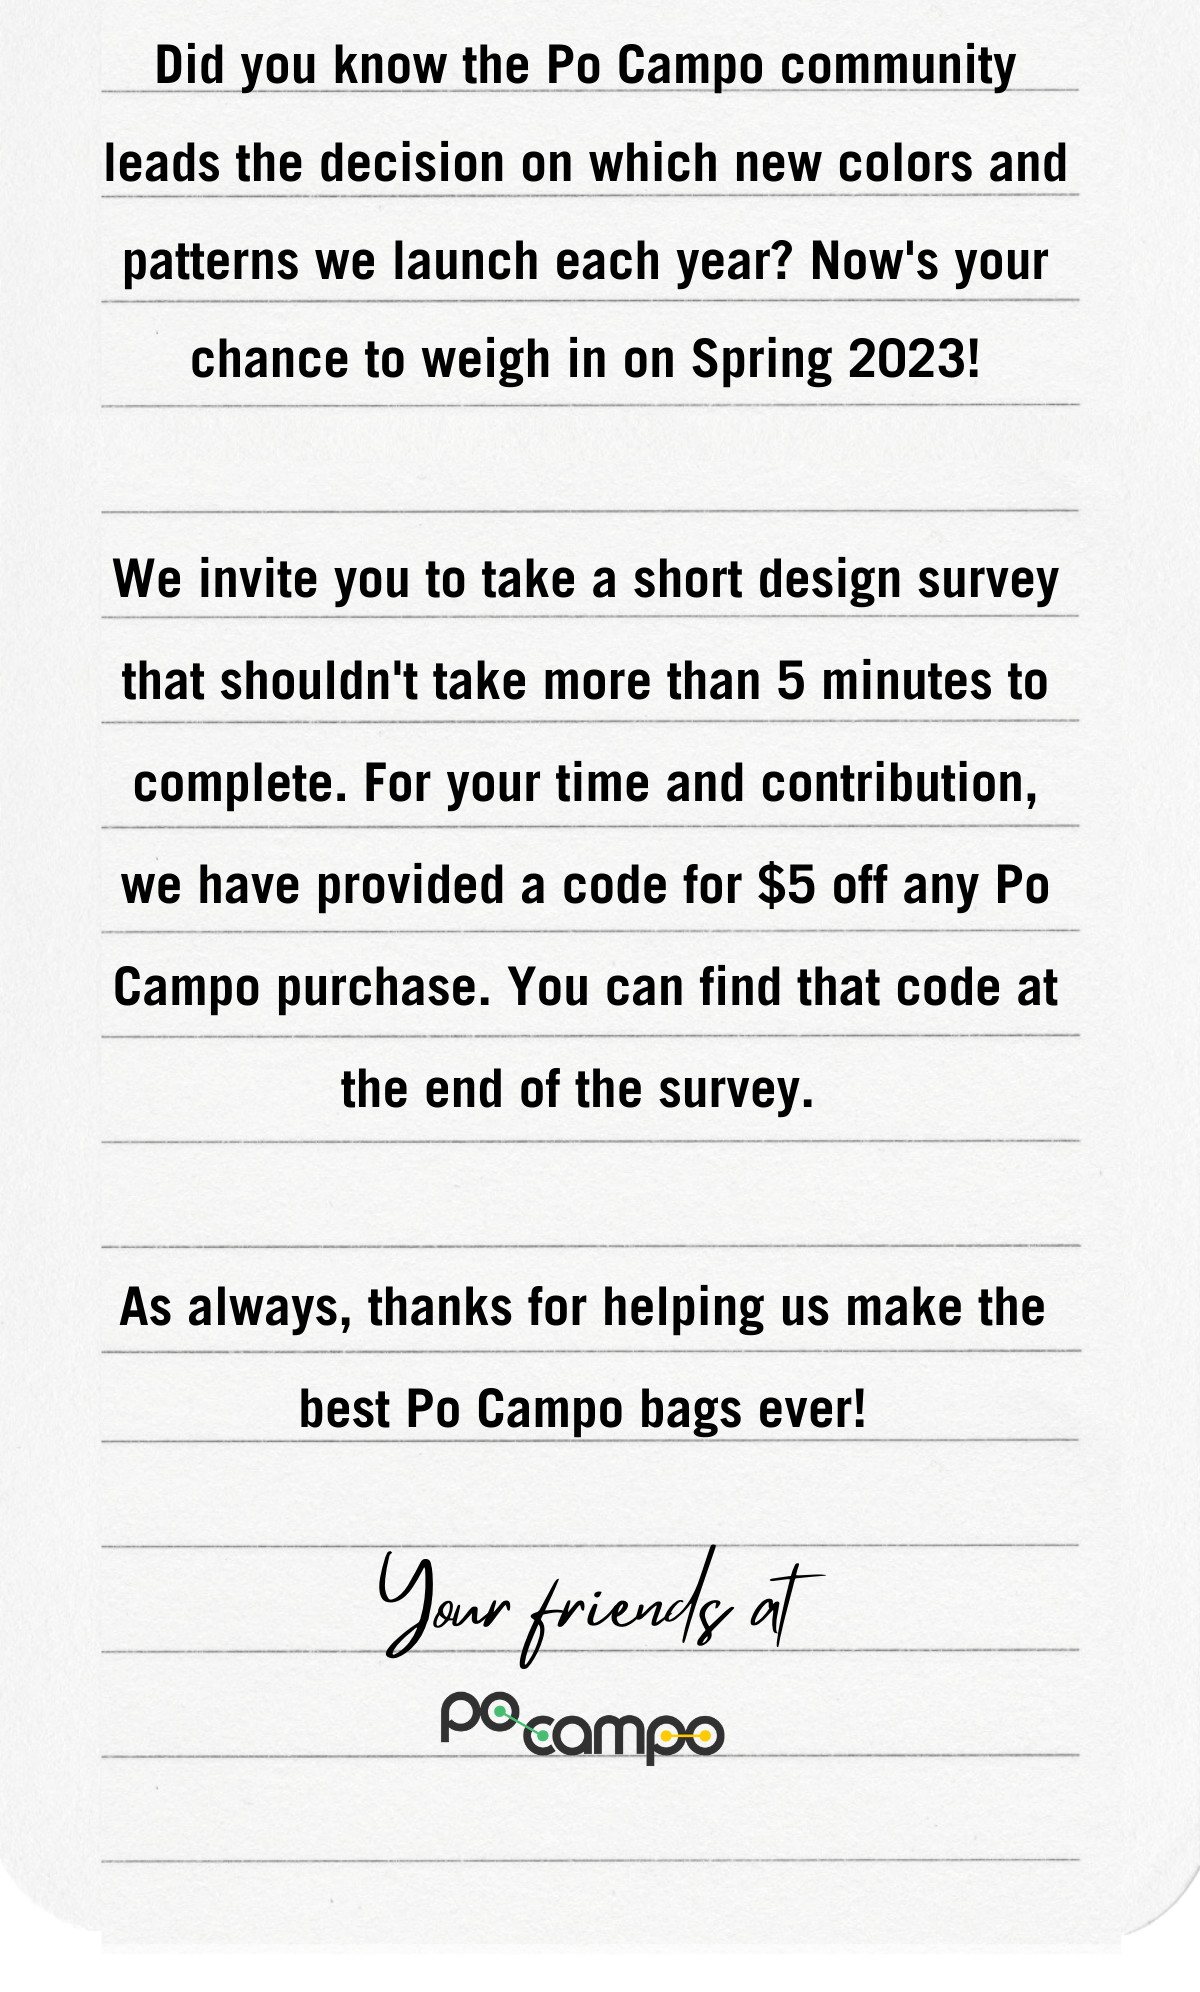 Did you know the Po Campo community leads the decision on which new colors and patterns we launch each year? Now's your chance to weigh in on Spring 2023! We invite you to take a short design survey that shouldn't take more than 5 minutes to complete. For your time and contribution, we have provided a code for $5 off any Po Campo purchase. You can find that code at the end of the survey.  As always, thanks for helping us make the best Po Campo bags ever! - Your friends at Po Campo